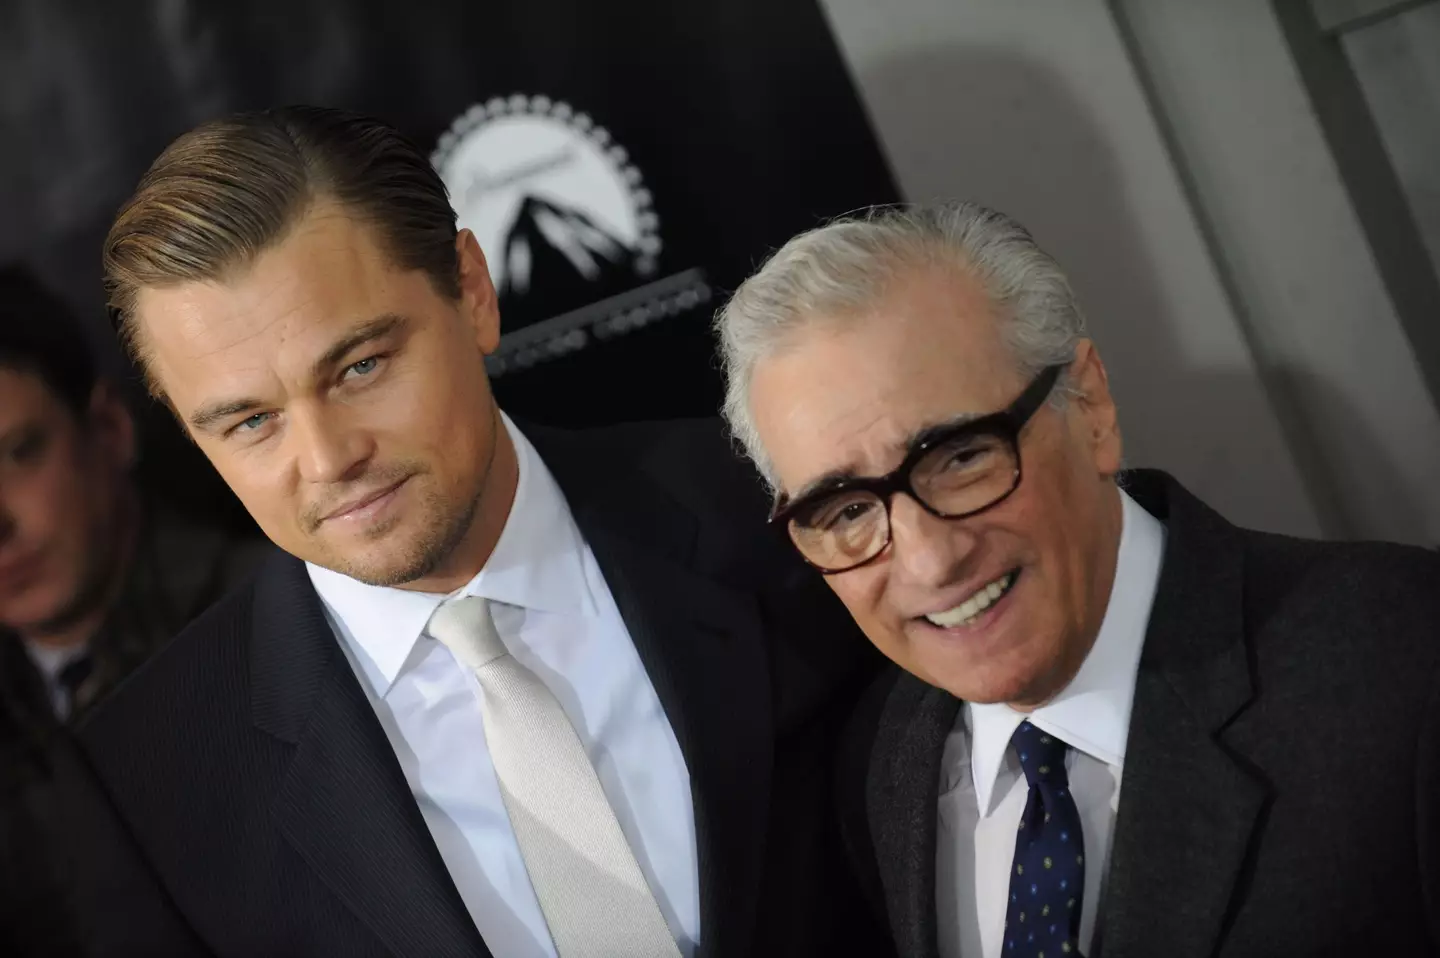 The pair last worked together on The Wolf of Wall Street.